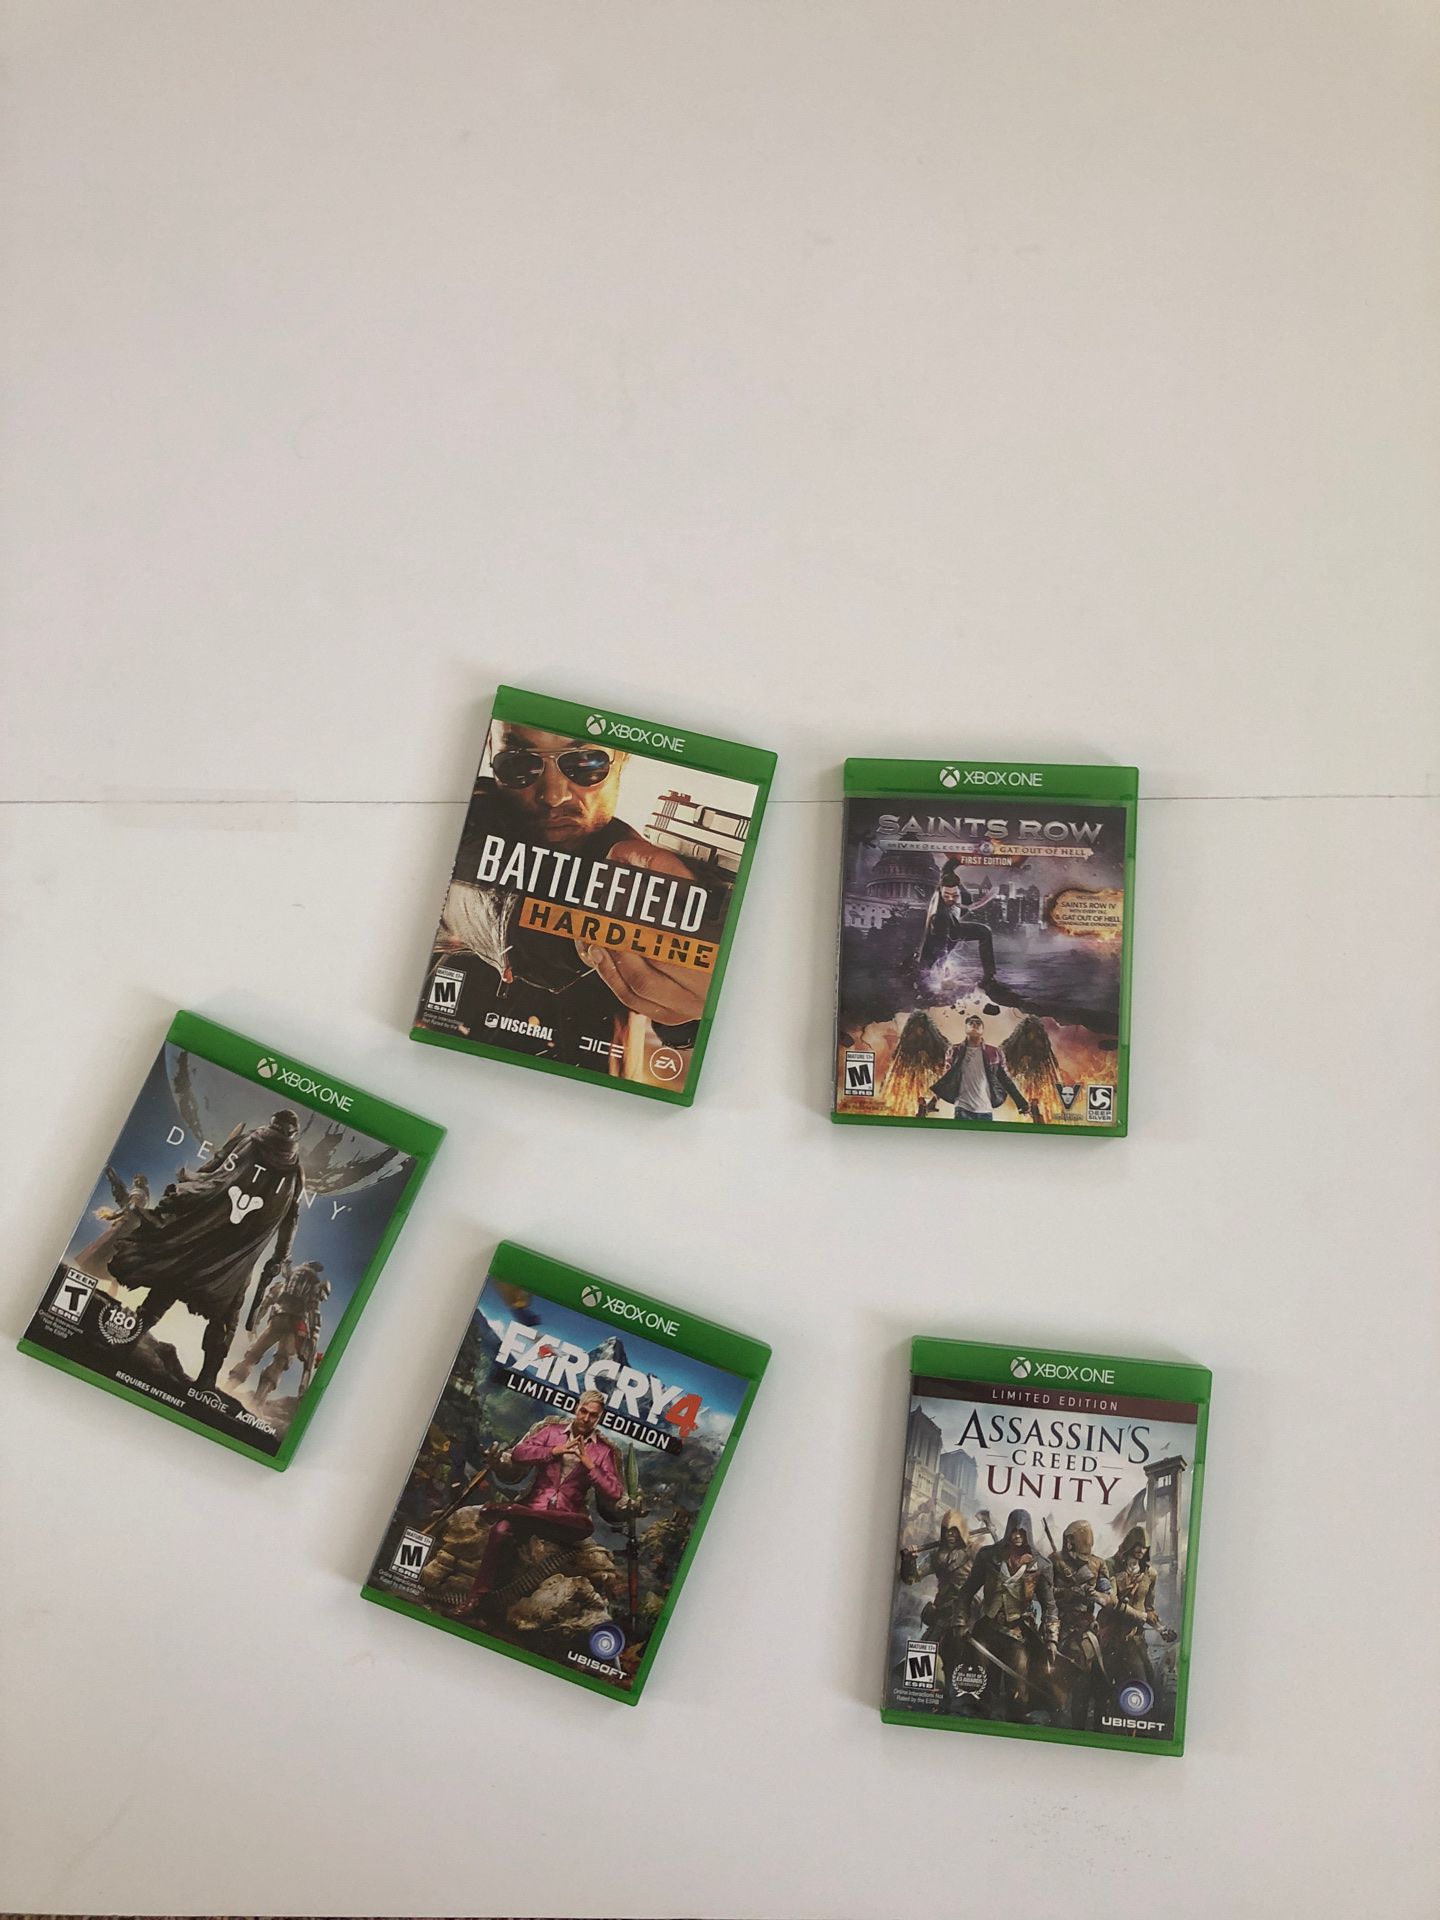 Xbox One Games: battlefield saints row farcry 4 assassins creed unity